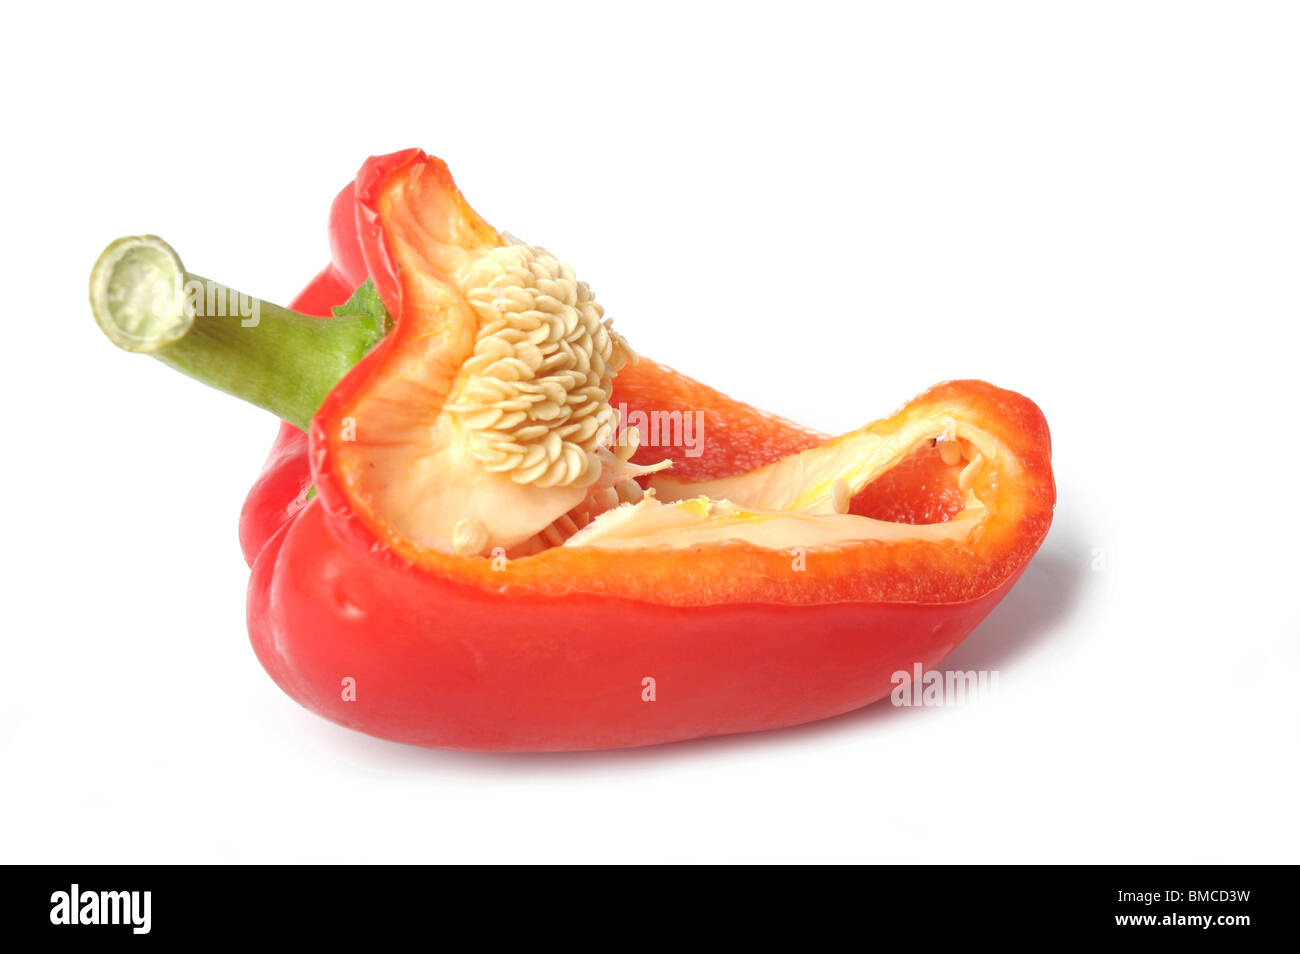 half a red bell pepper Stock Photo